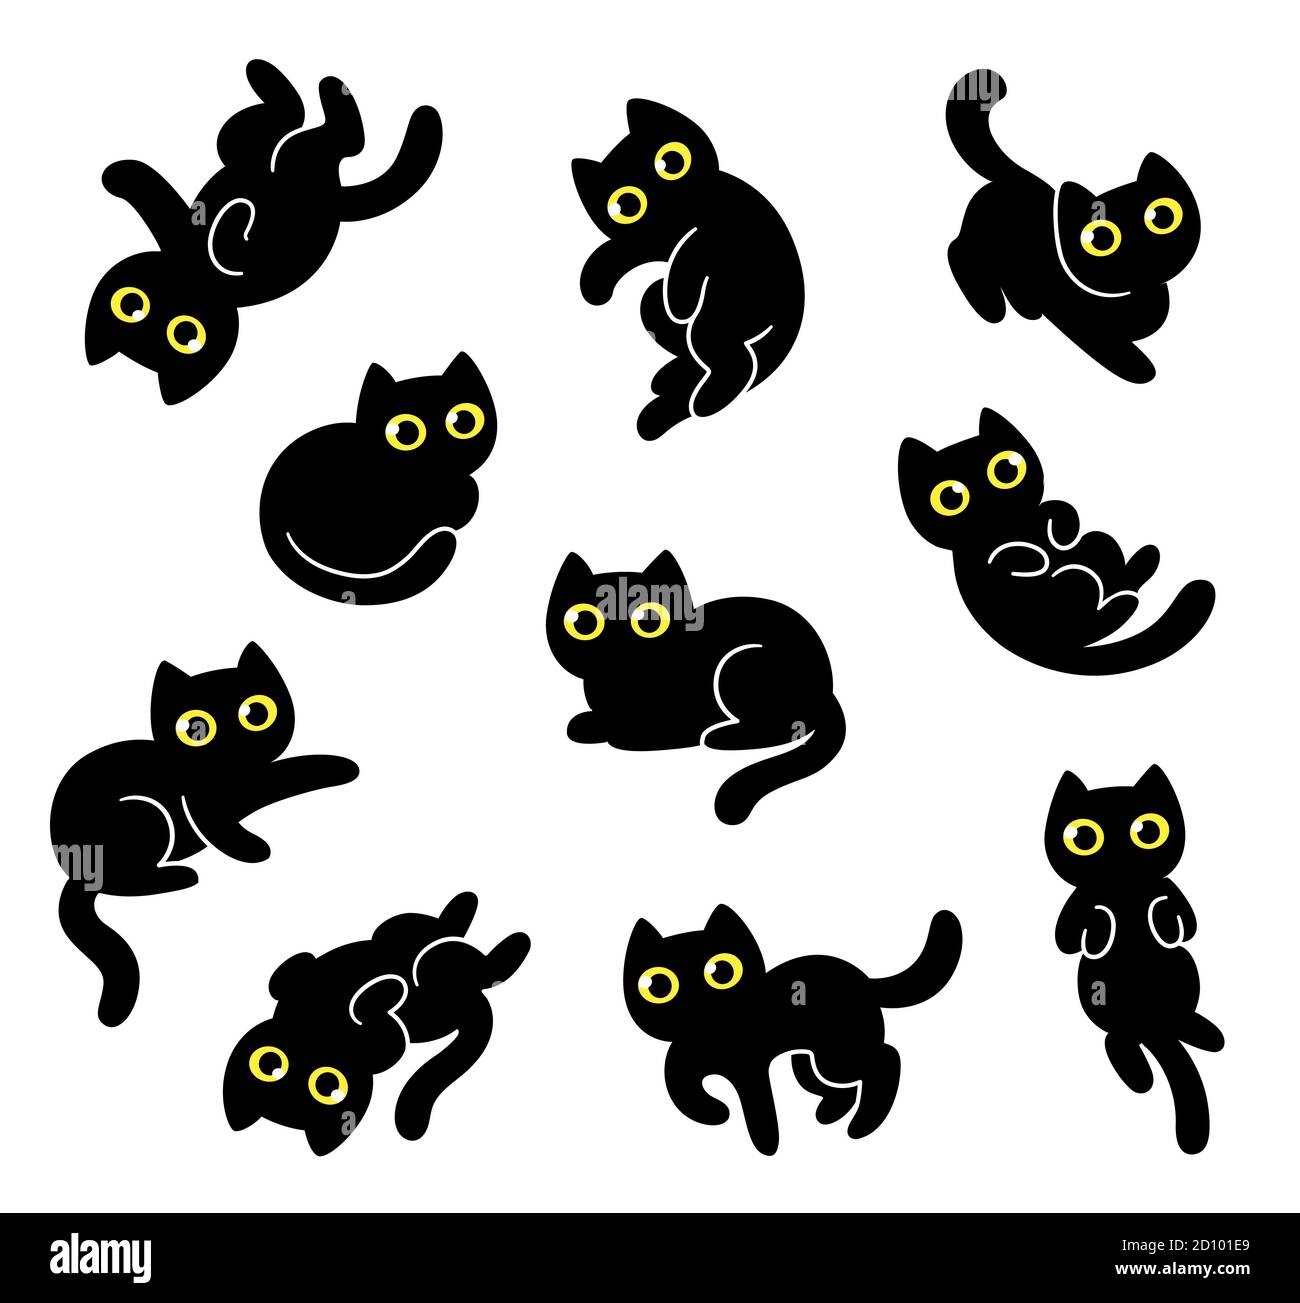 Cute Cartoon Black Cat Drawing Set Hand Drawn Kitty Doodles In Different Poses Simple Kawaii Style Vector Clip Art Illustration Stock Vector Image Art Alamy